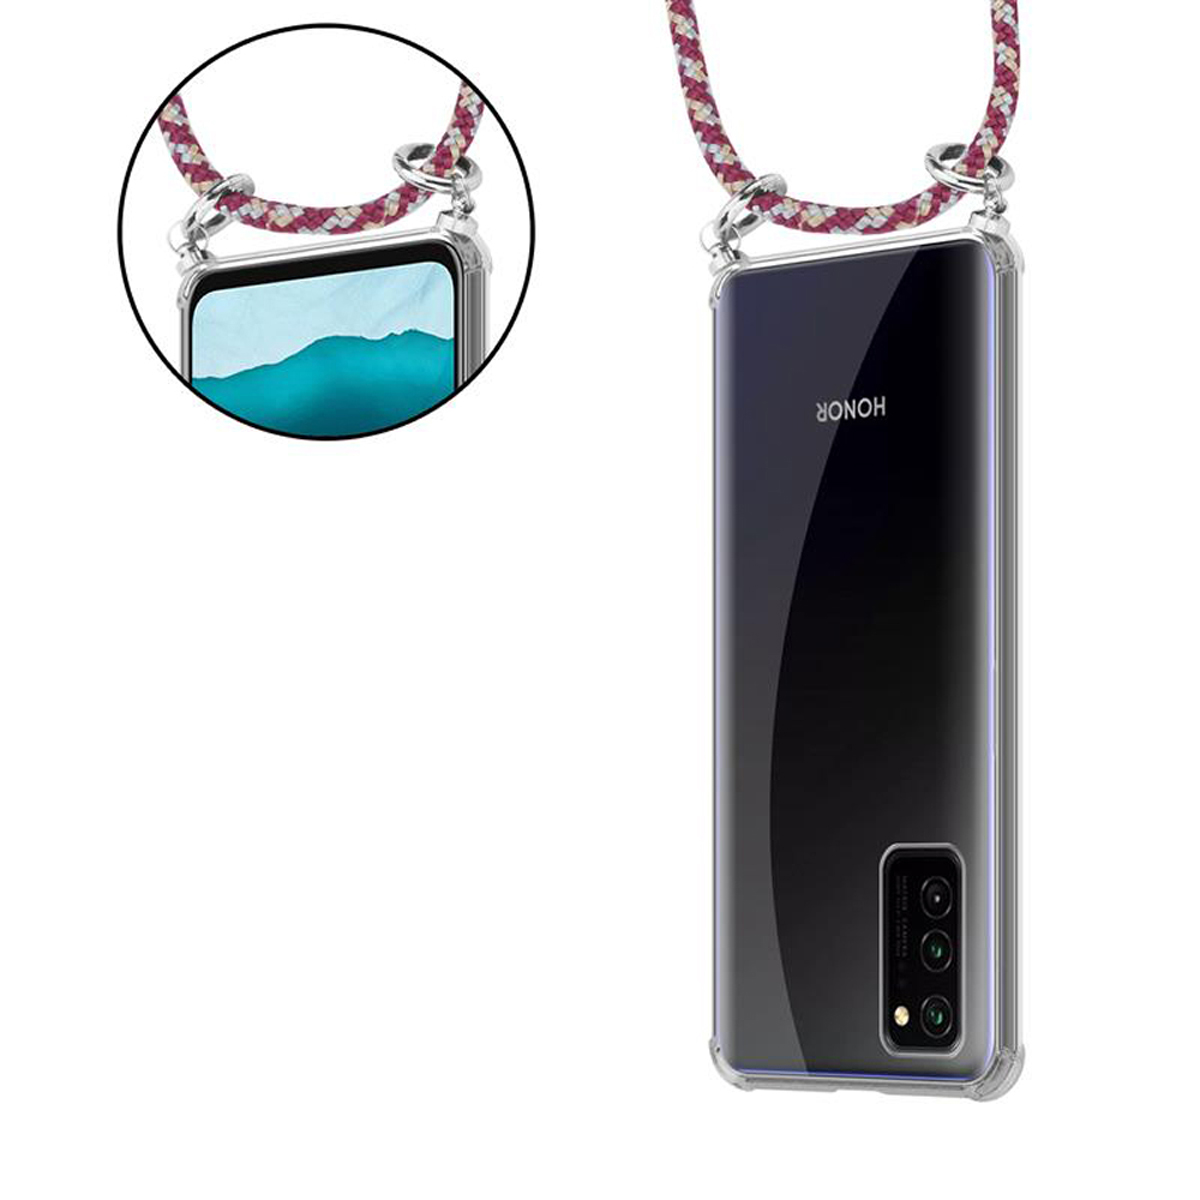 CADORABO Handy Kette mit Hülle, ROT View Silber und abnehmbarer Ringen, 30, GELB Backcover, Kordel Honor, WEIß Band